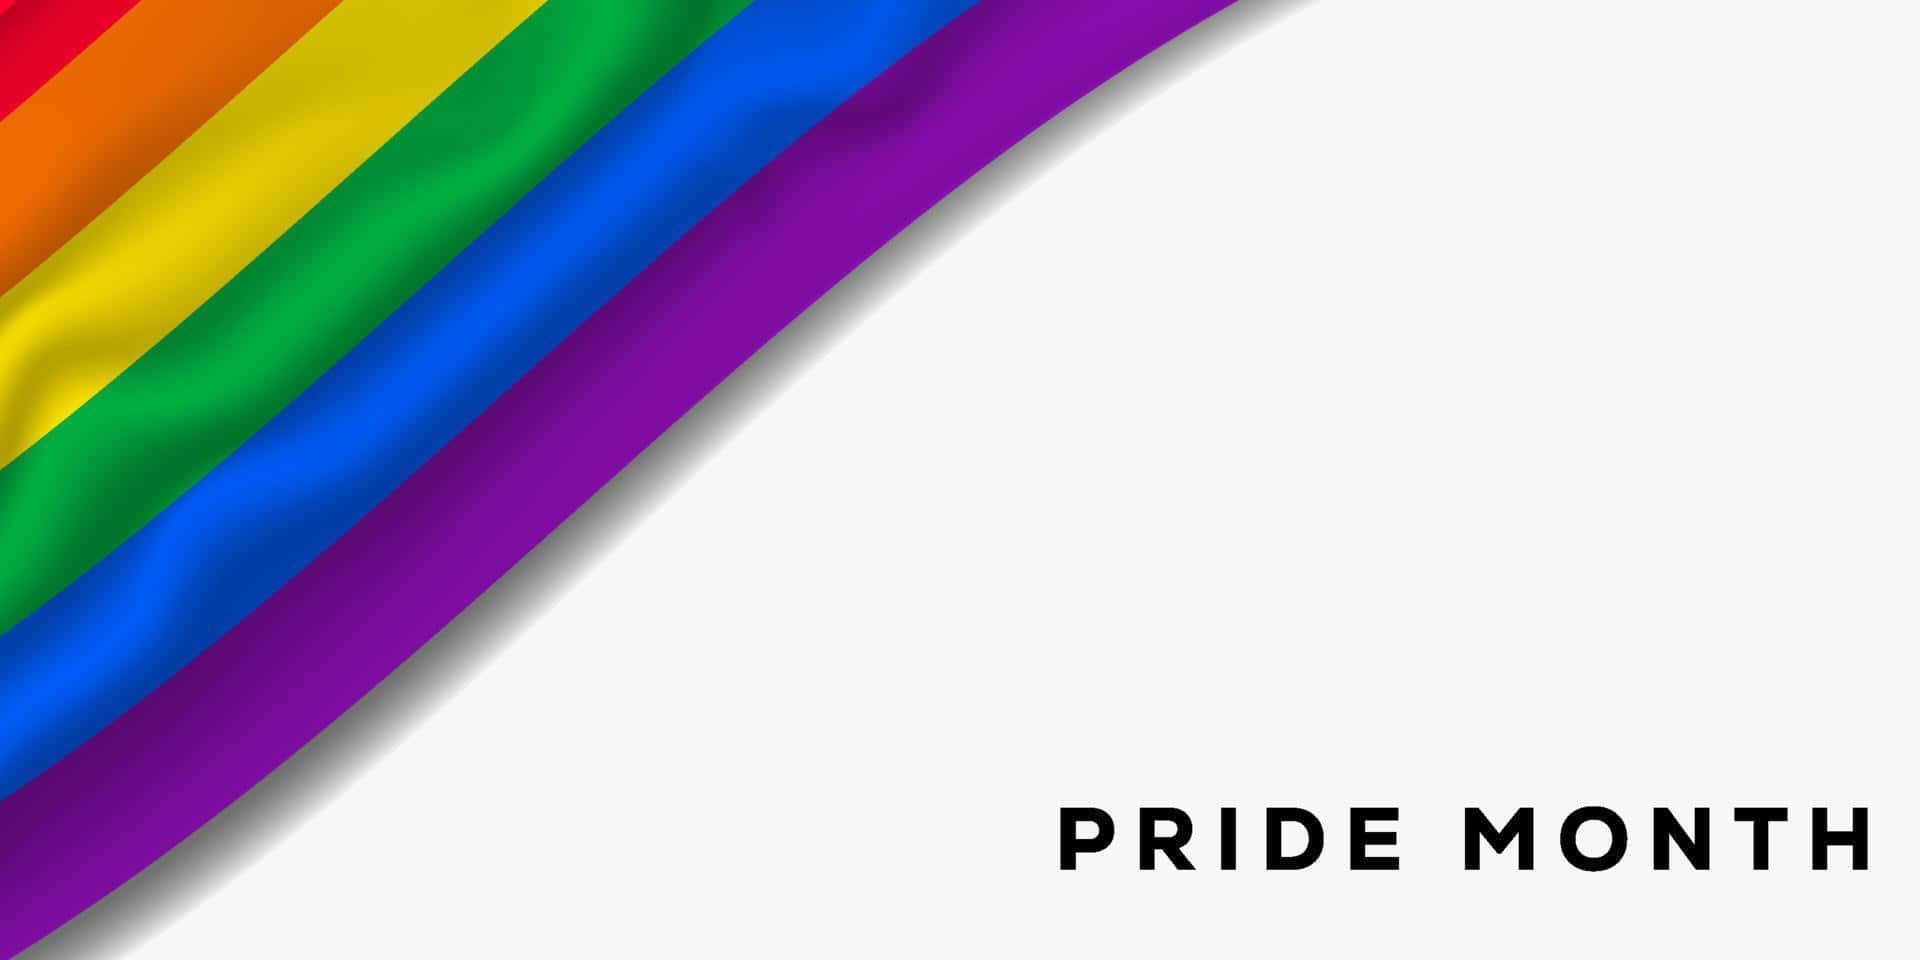 A symbol of acceptance and inclusivity, this colorful rainbow pride flag waves in the breeze of equality and love